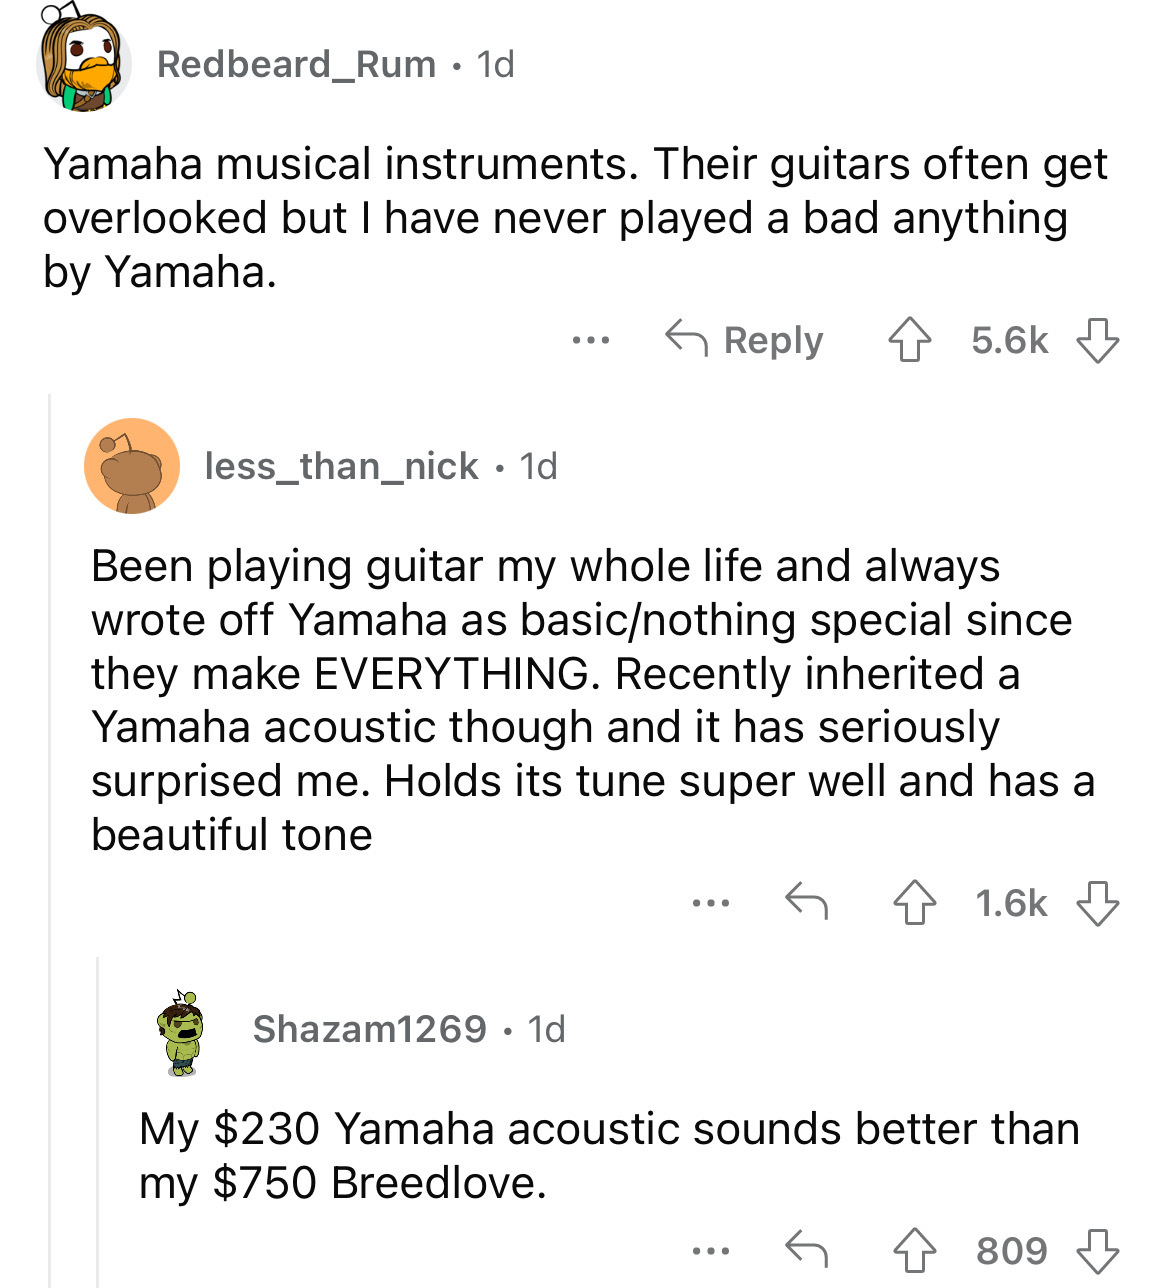 angle - Redbeard_Rum 1d Yamaha musical instruments. Their guitars often get overlooked but I have never played a bad anything by Yamaha. less_than_nick. 1d. ... Shazam1269 1d 4 Been playing guitar my whole life and always wrote off Yamaha as basicnothing 